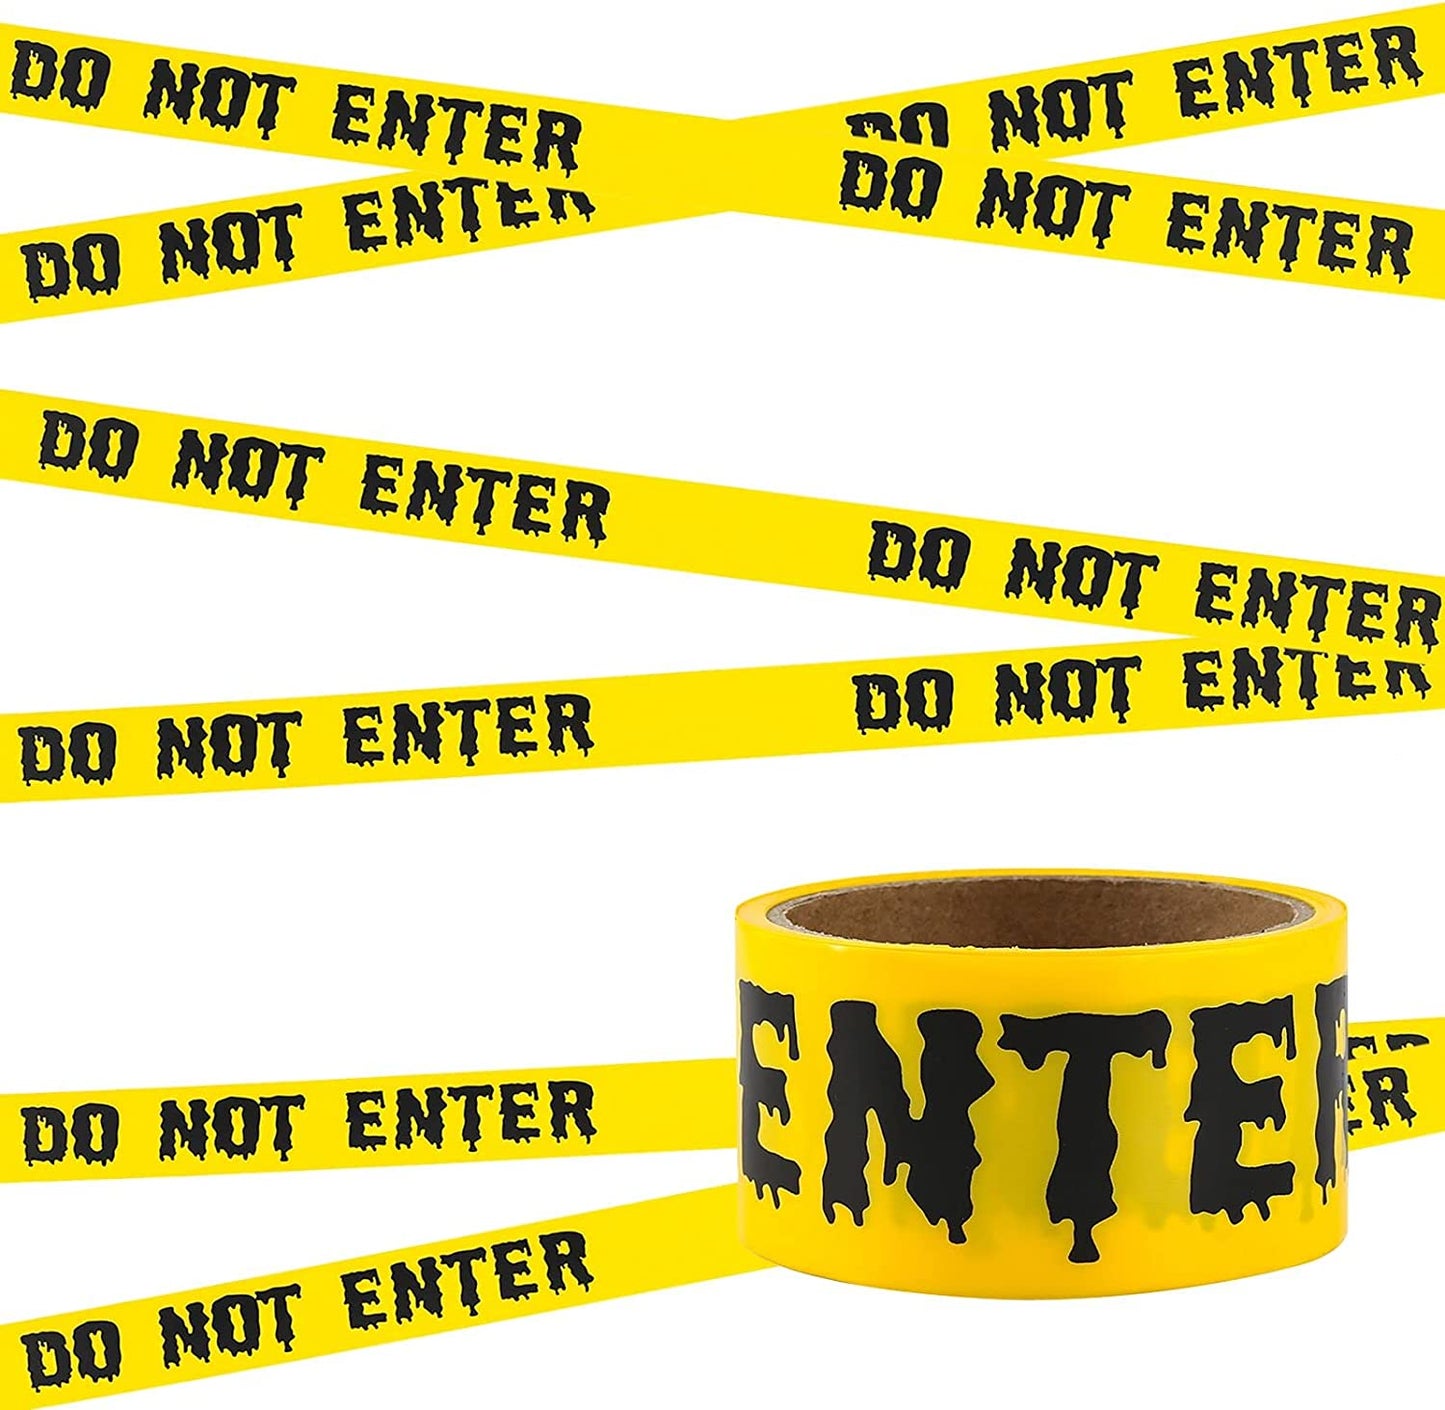 Halloween Caution Tapes, Halloween Hazard Warning Barrier Tape Halloween Zombie Caution Tape, Halloween Props Fright Tape Bundle for Zombie Party or Halloween Party Decorations(25Mx4.8Cm) (Style B)